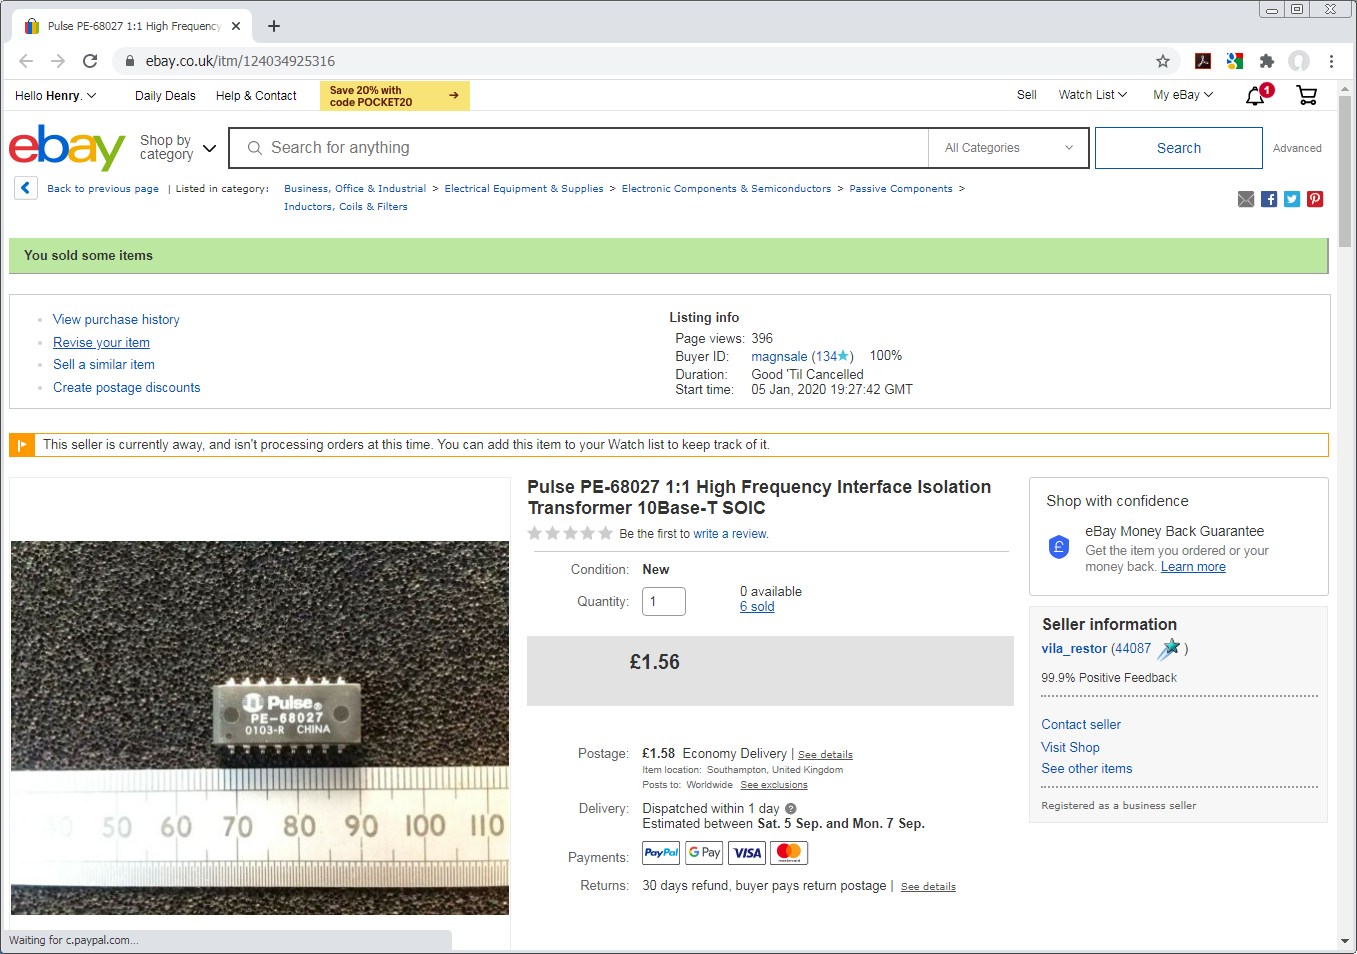 Ebay Malfunction Damages Sales By Incorrect Holiday Display
        02-09-2020